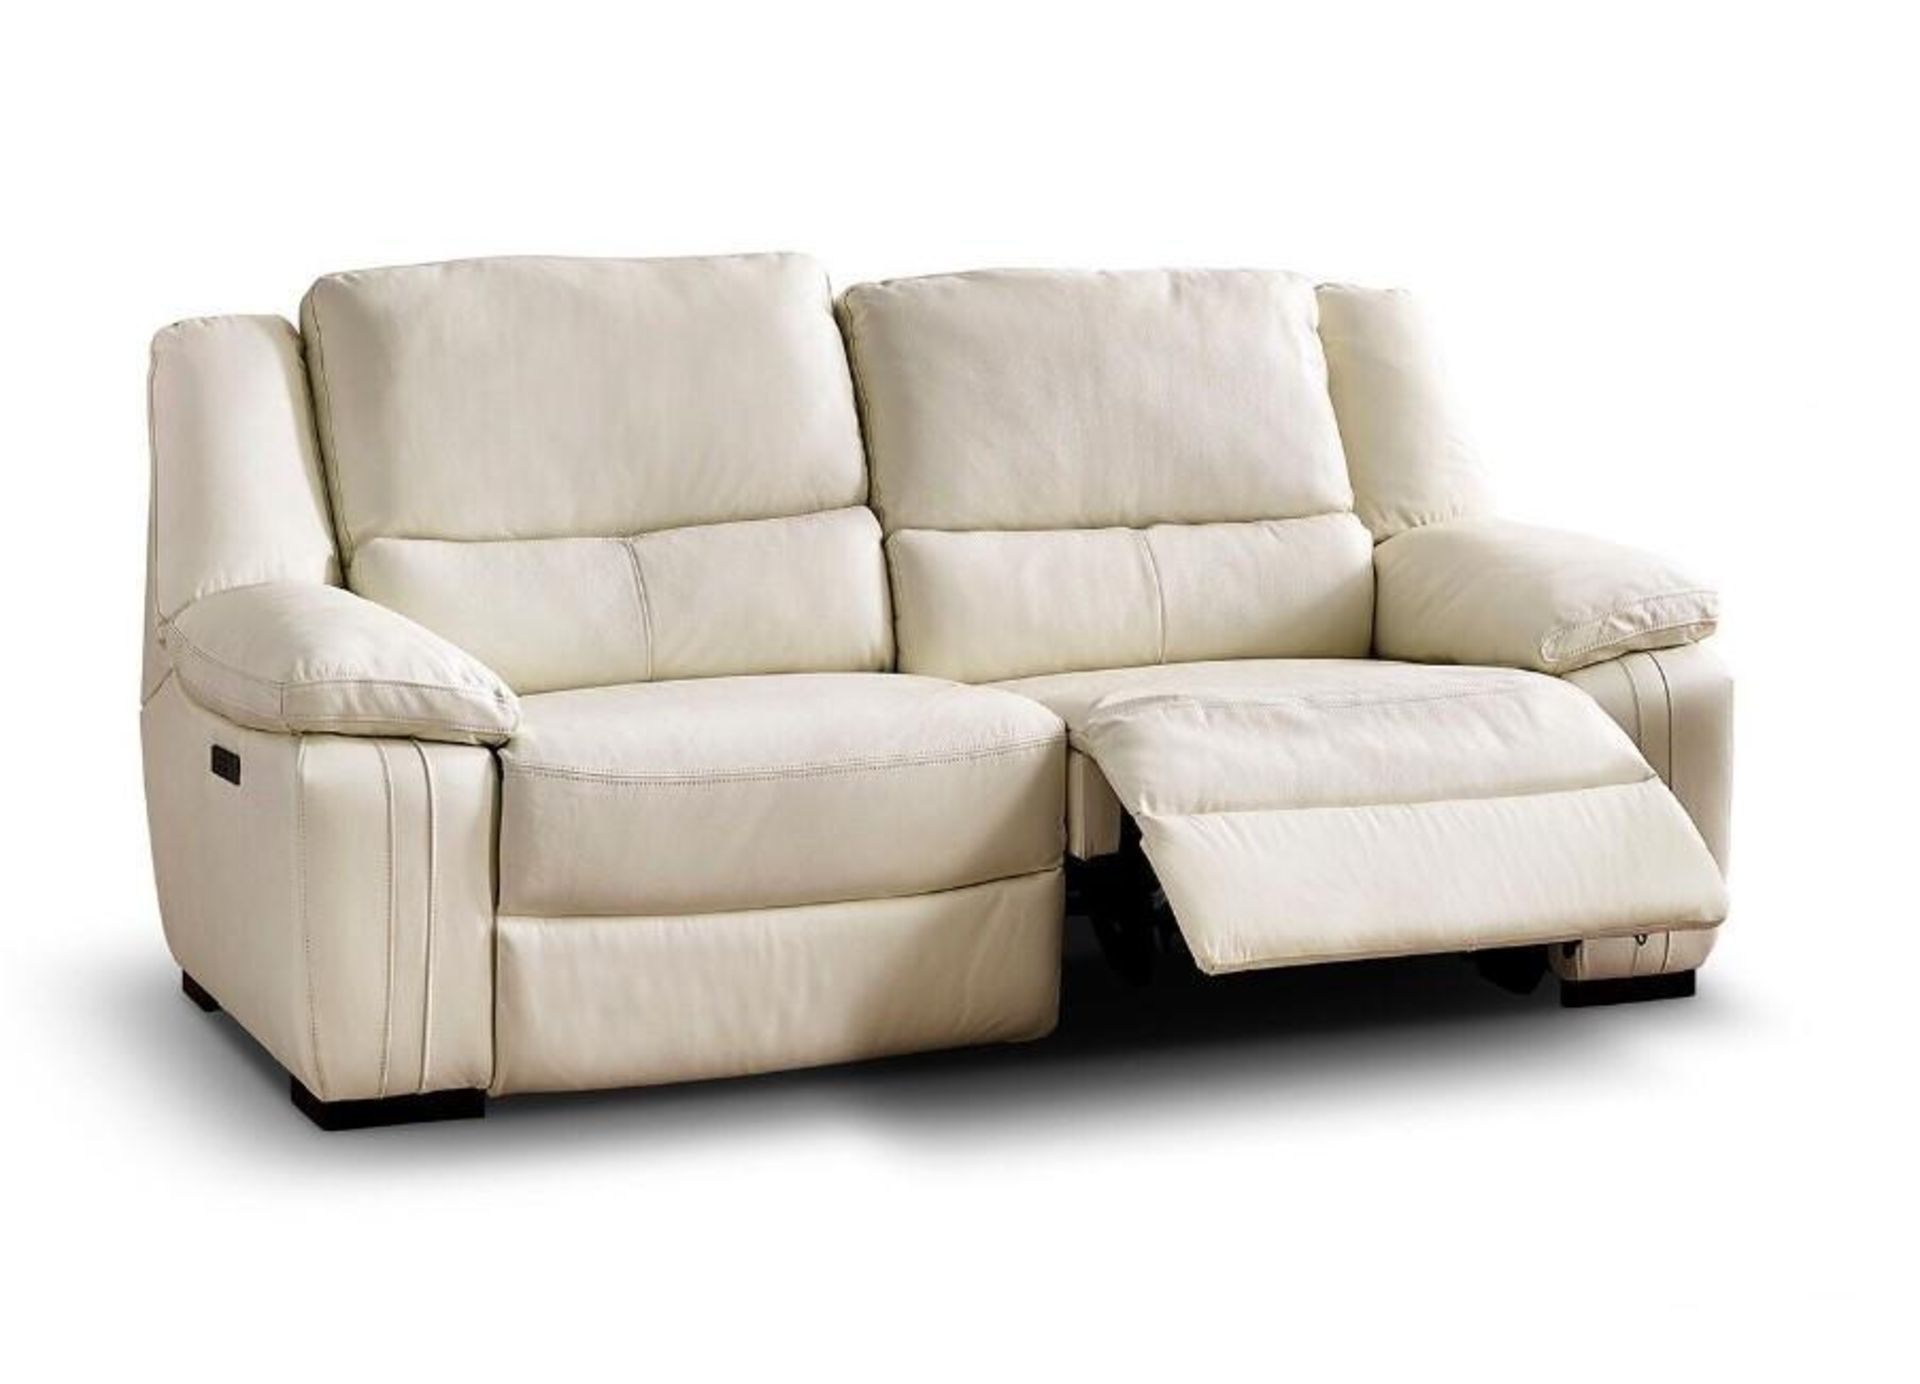 Brand new and boxed SCS Fallon 3 seater electric reclining sofa in Cream. - Bild 6 aus 7